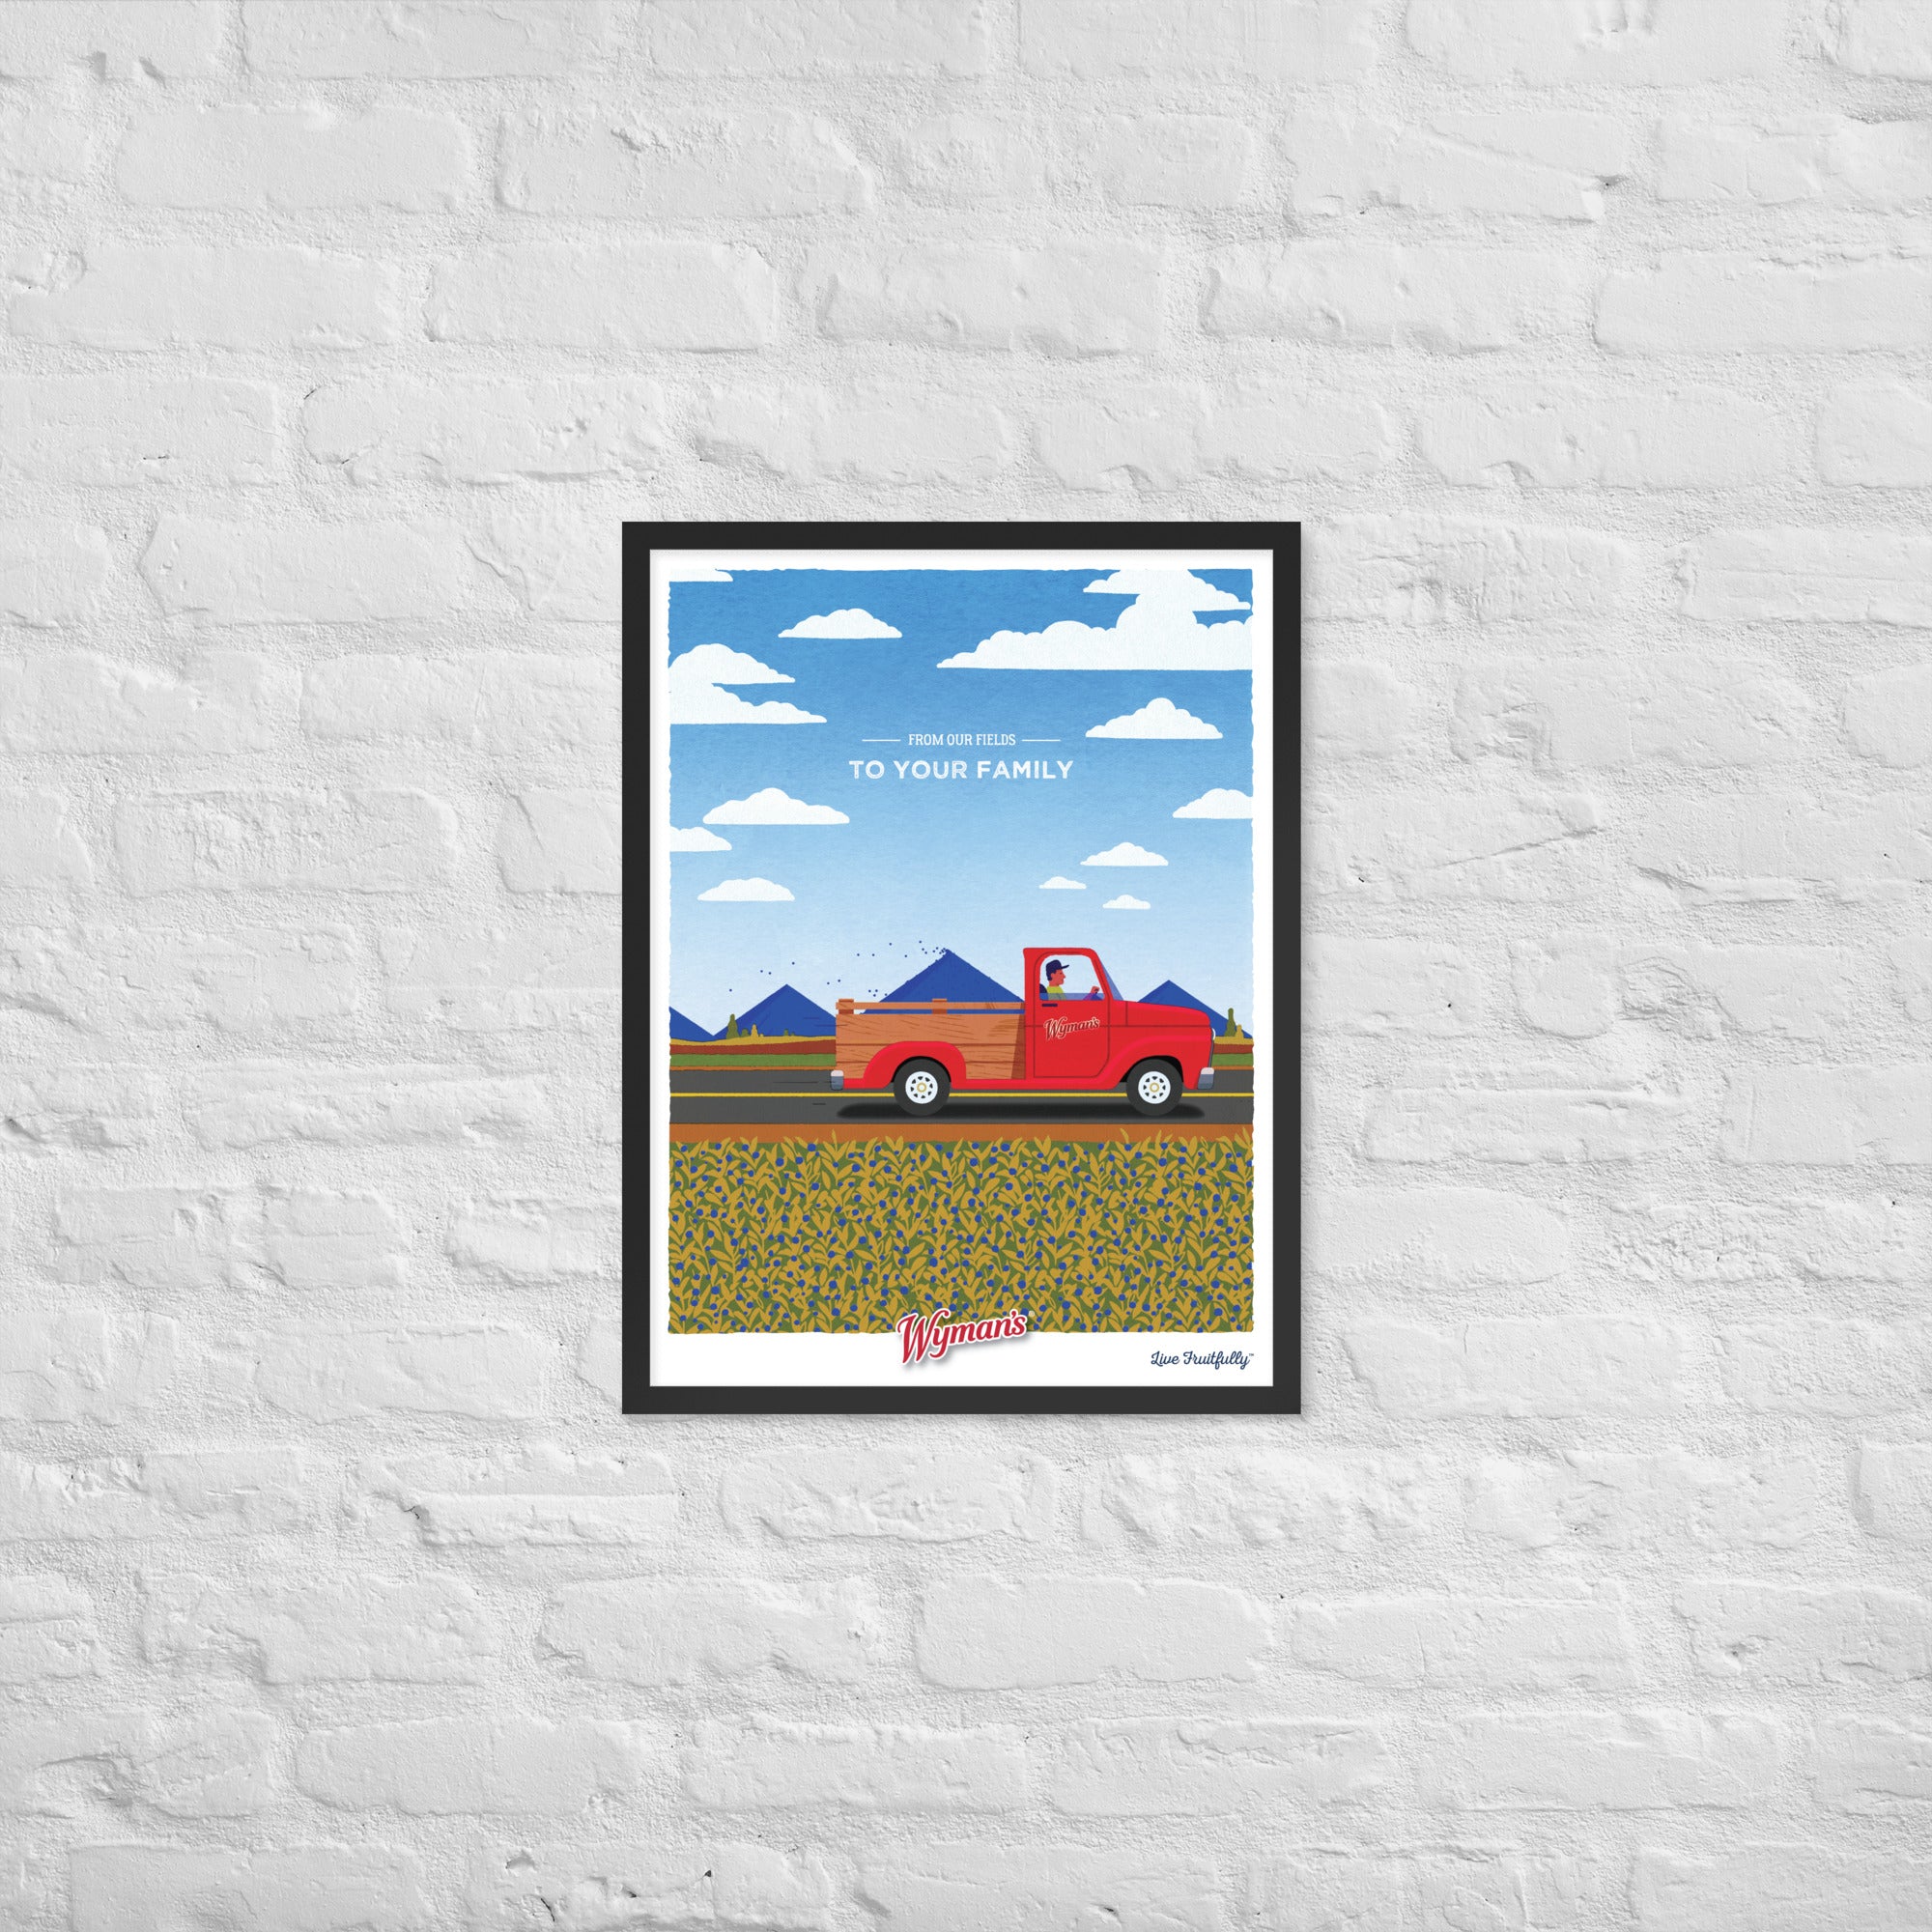 Shop Wyman's From Our Fields to Your Family poster frame.